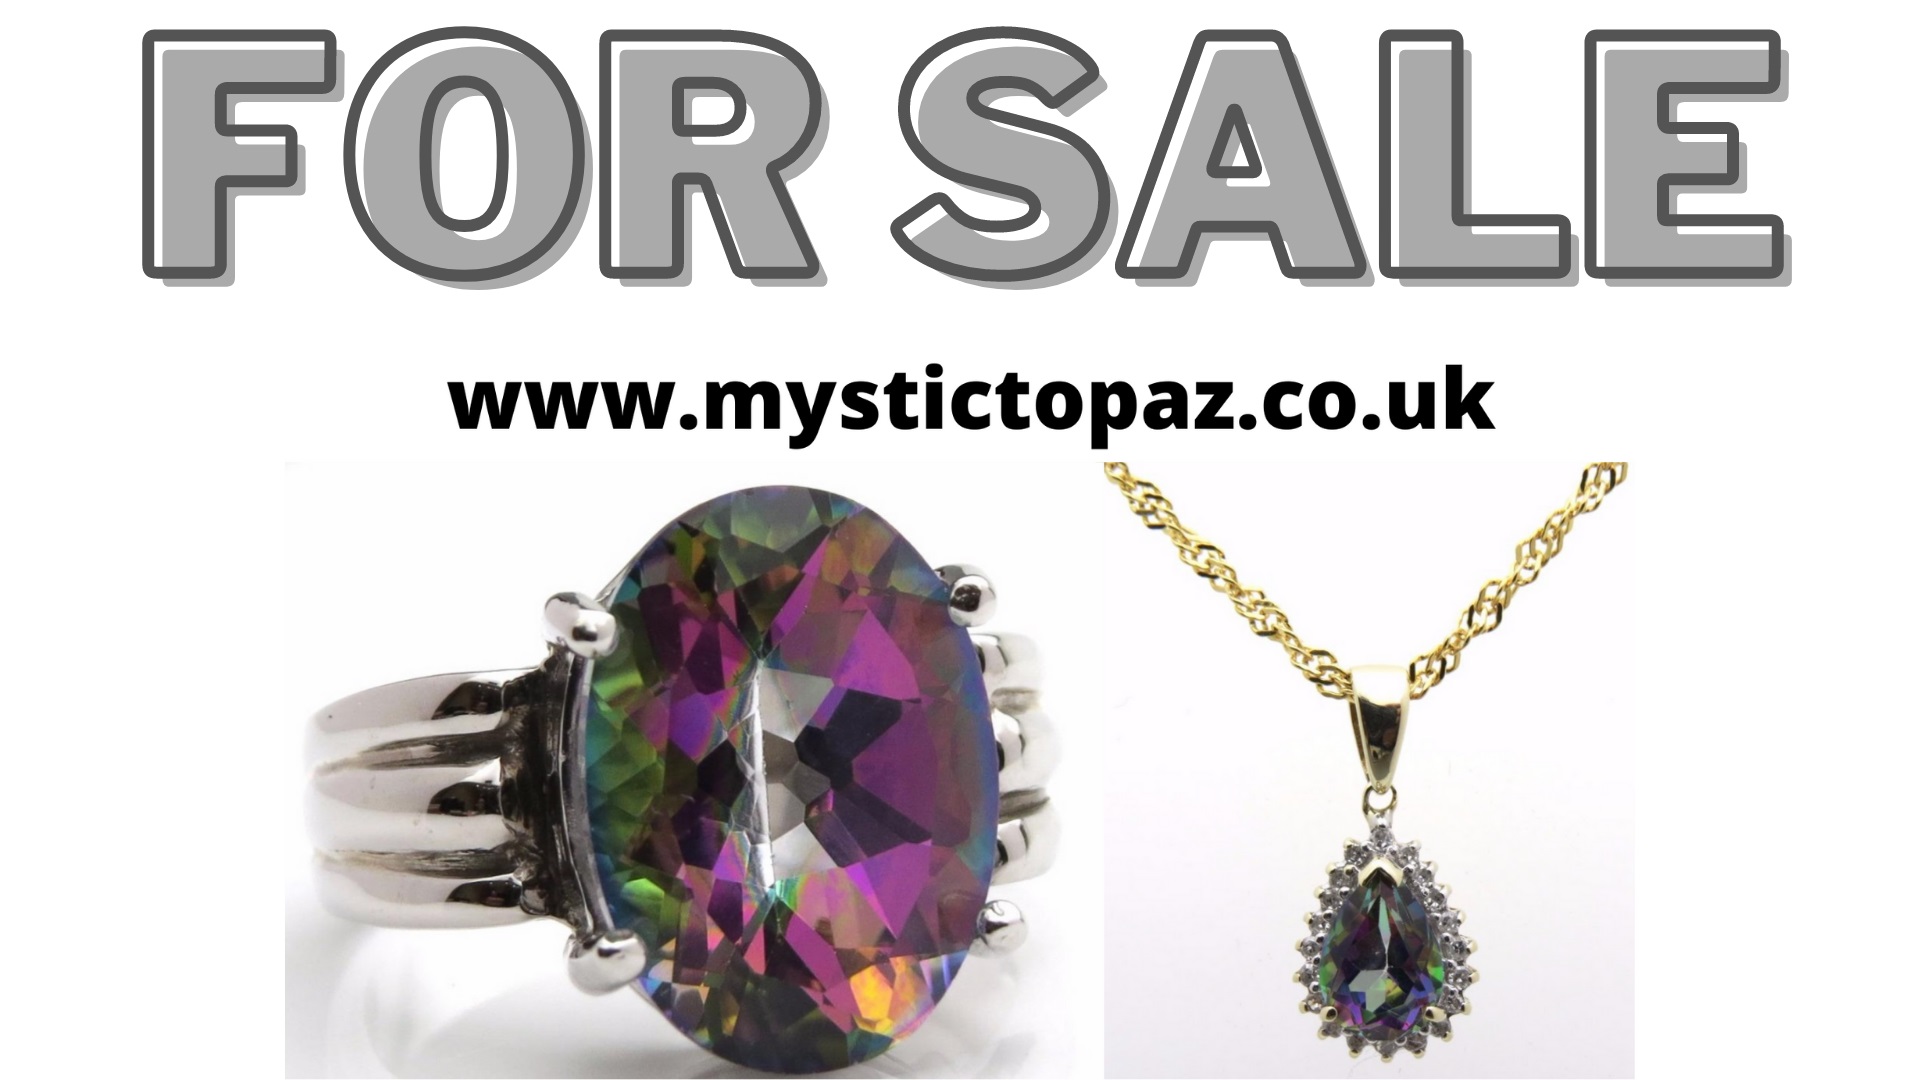 banner with mystic topaz 9ct gold jewellery by strongfields the jeweller displaying domain for sale mystictopaz.co.uk